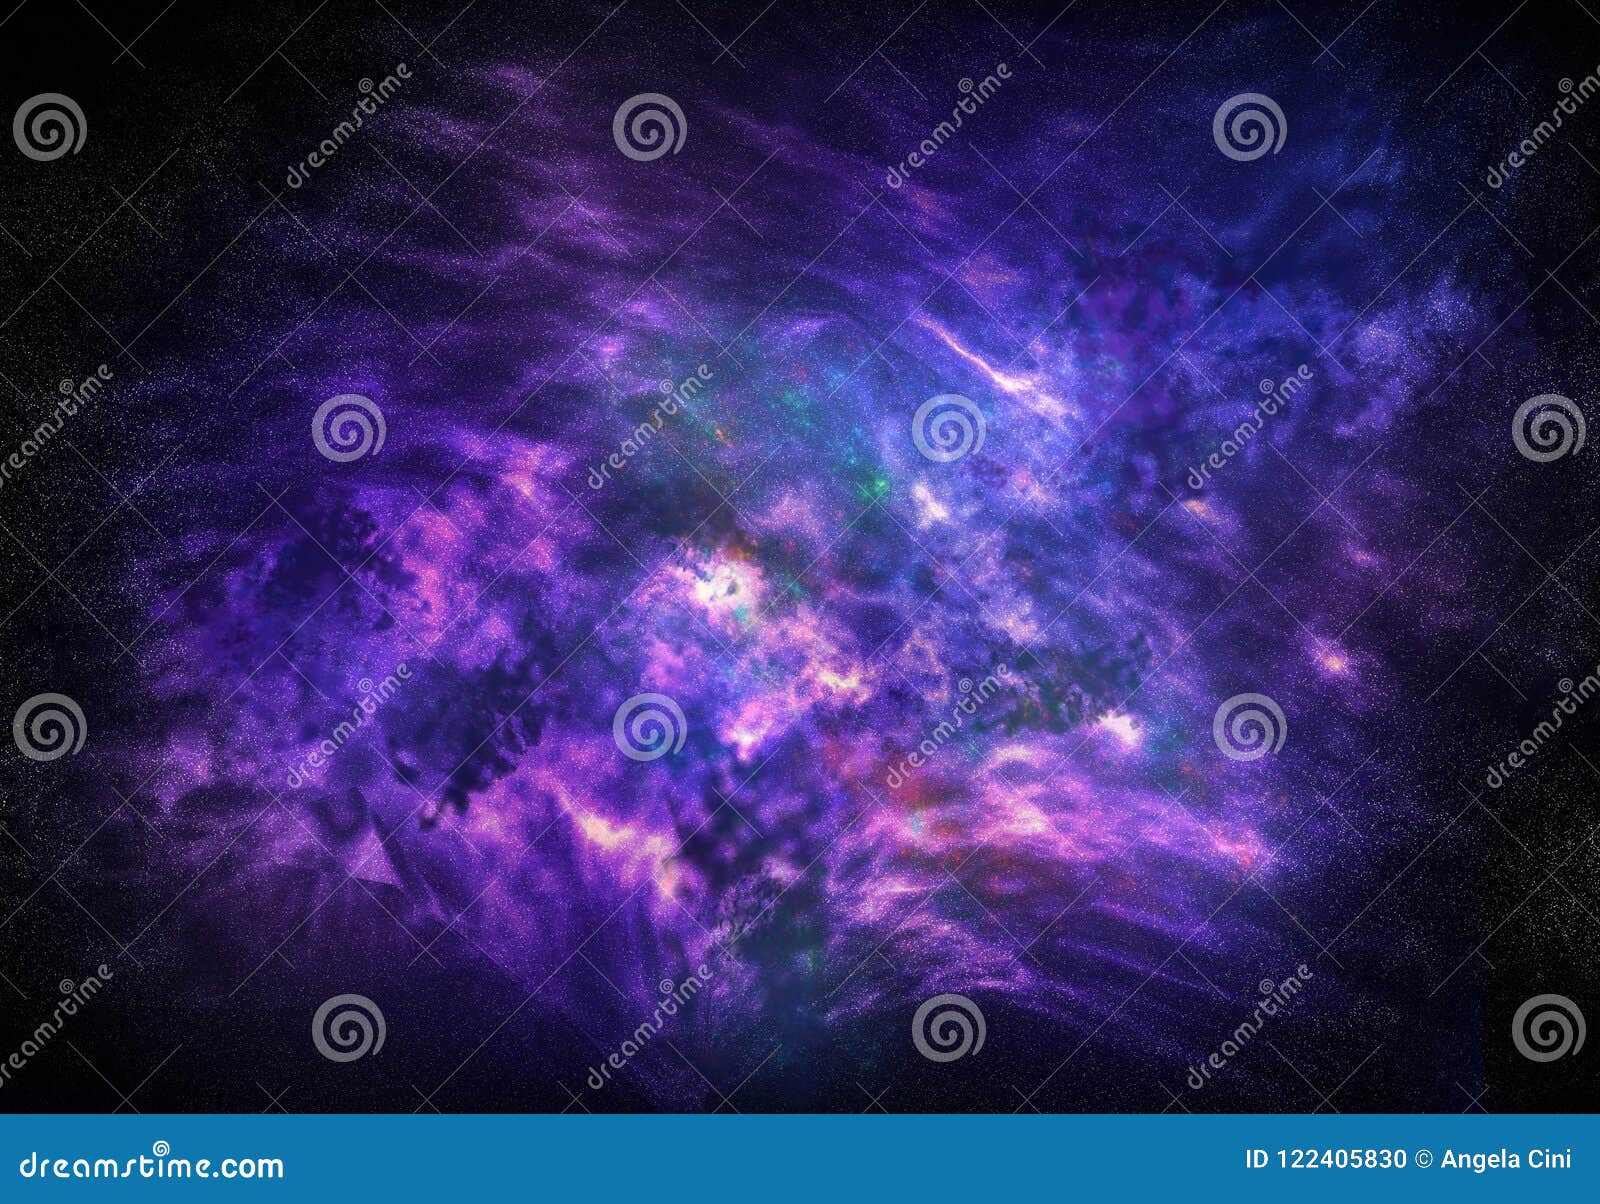 Abstract Nebula In Universe Stock Illustration